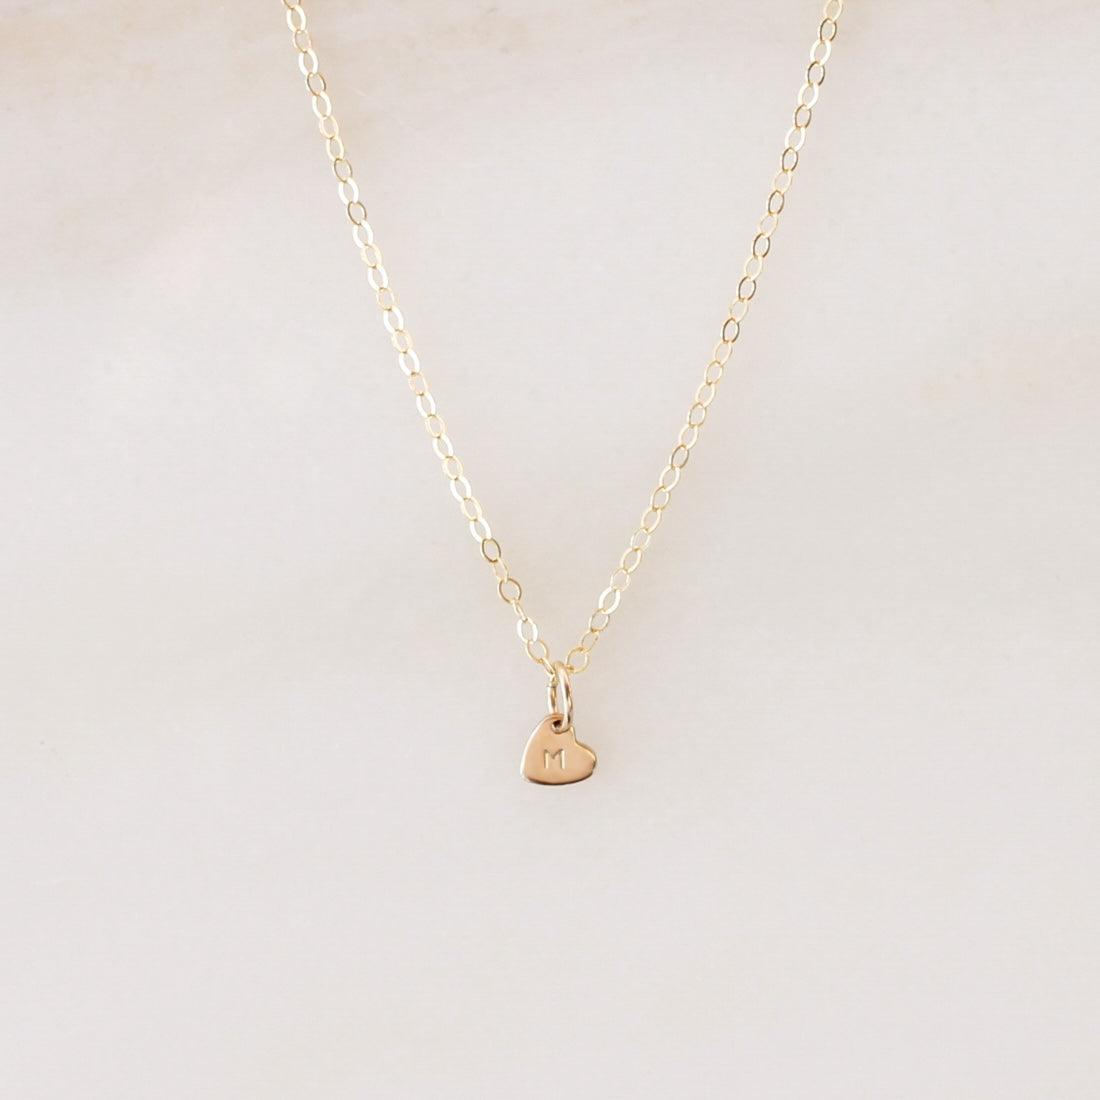 Cleo Heart Necklace - Nolia Jewelry - Meaningful + Sustainably Handcrafted Jewelry